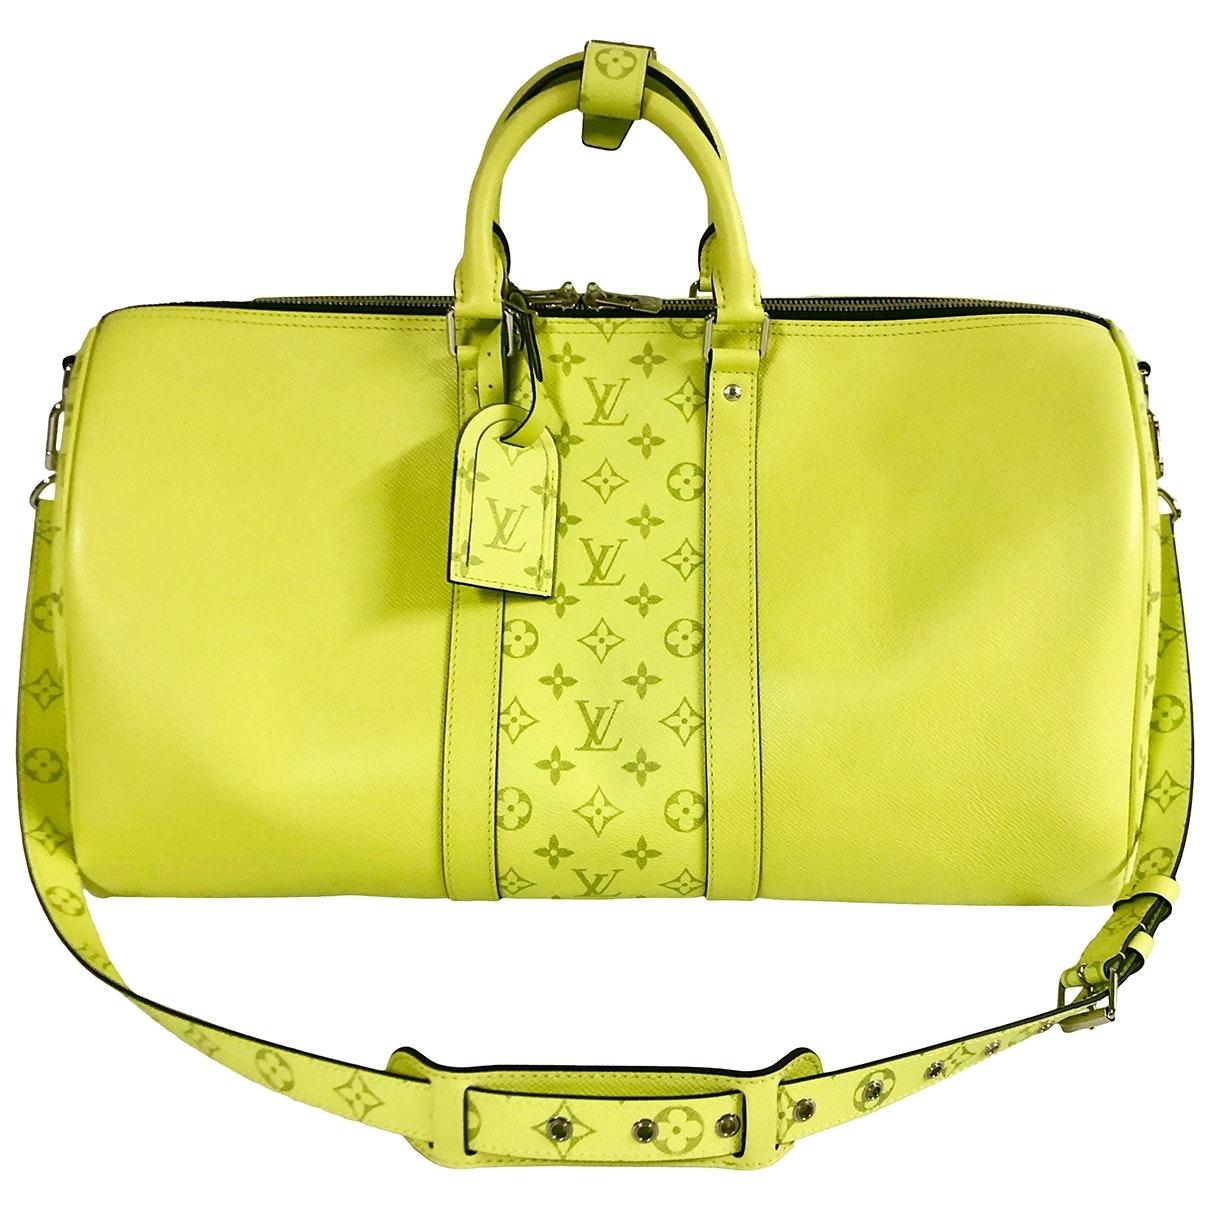 Louis Vuitton Keepall Leather Weekend Bag in Yellow for Men - Lyst